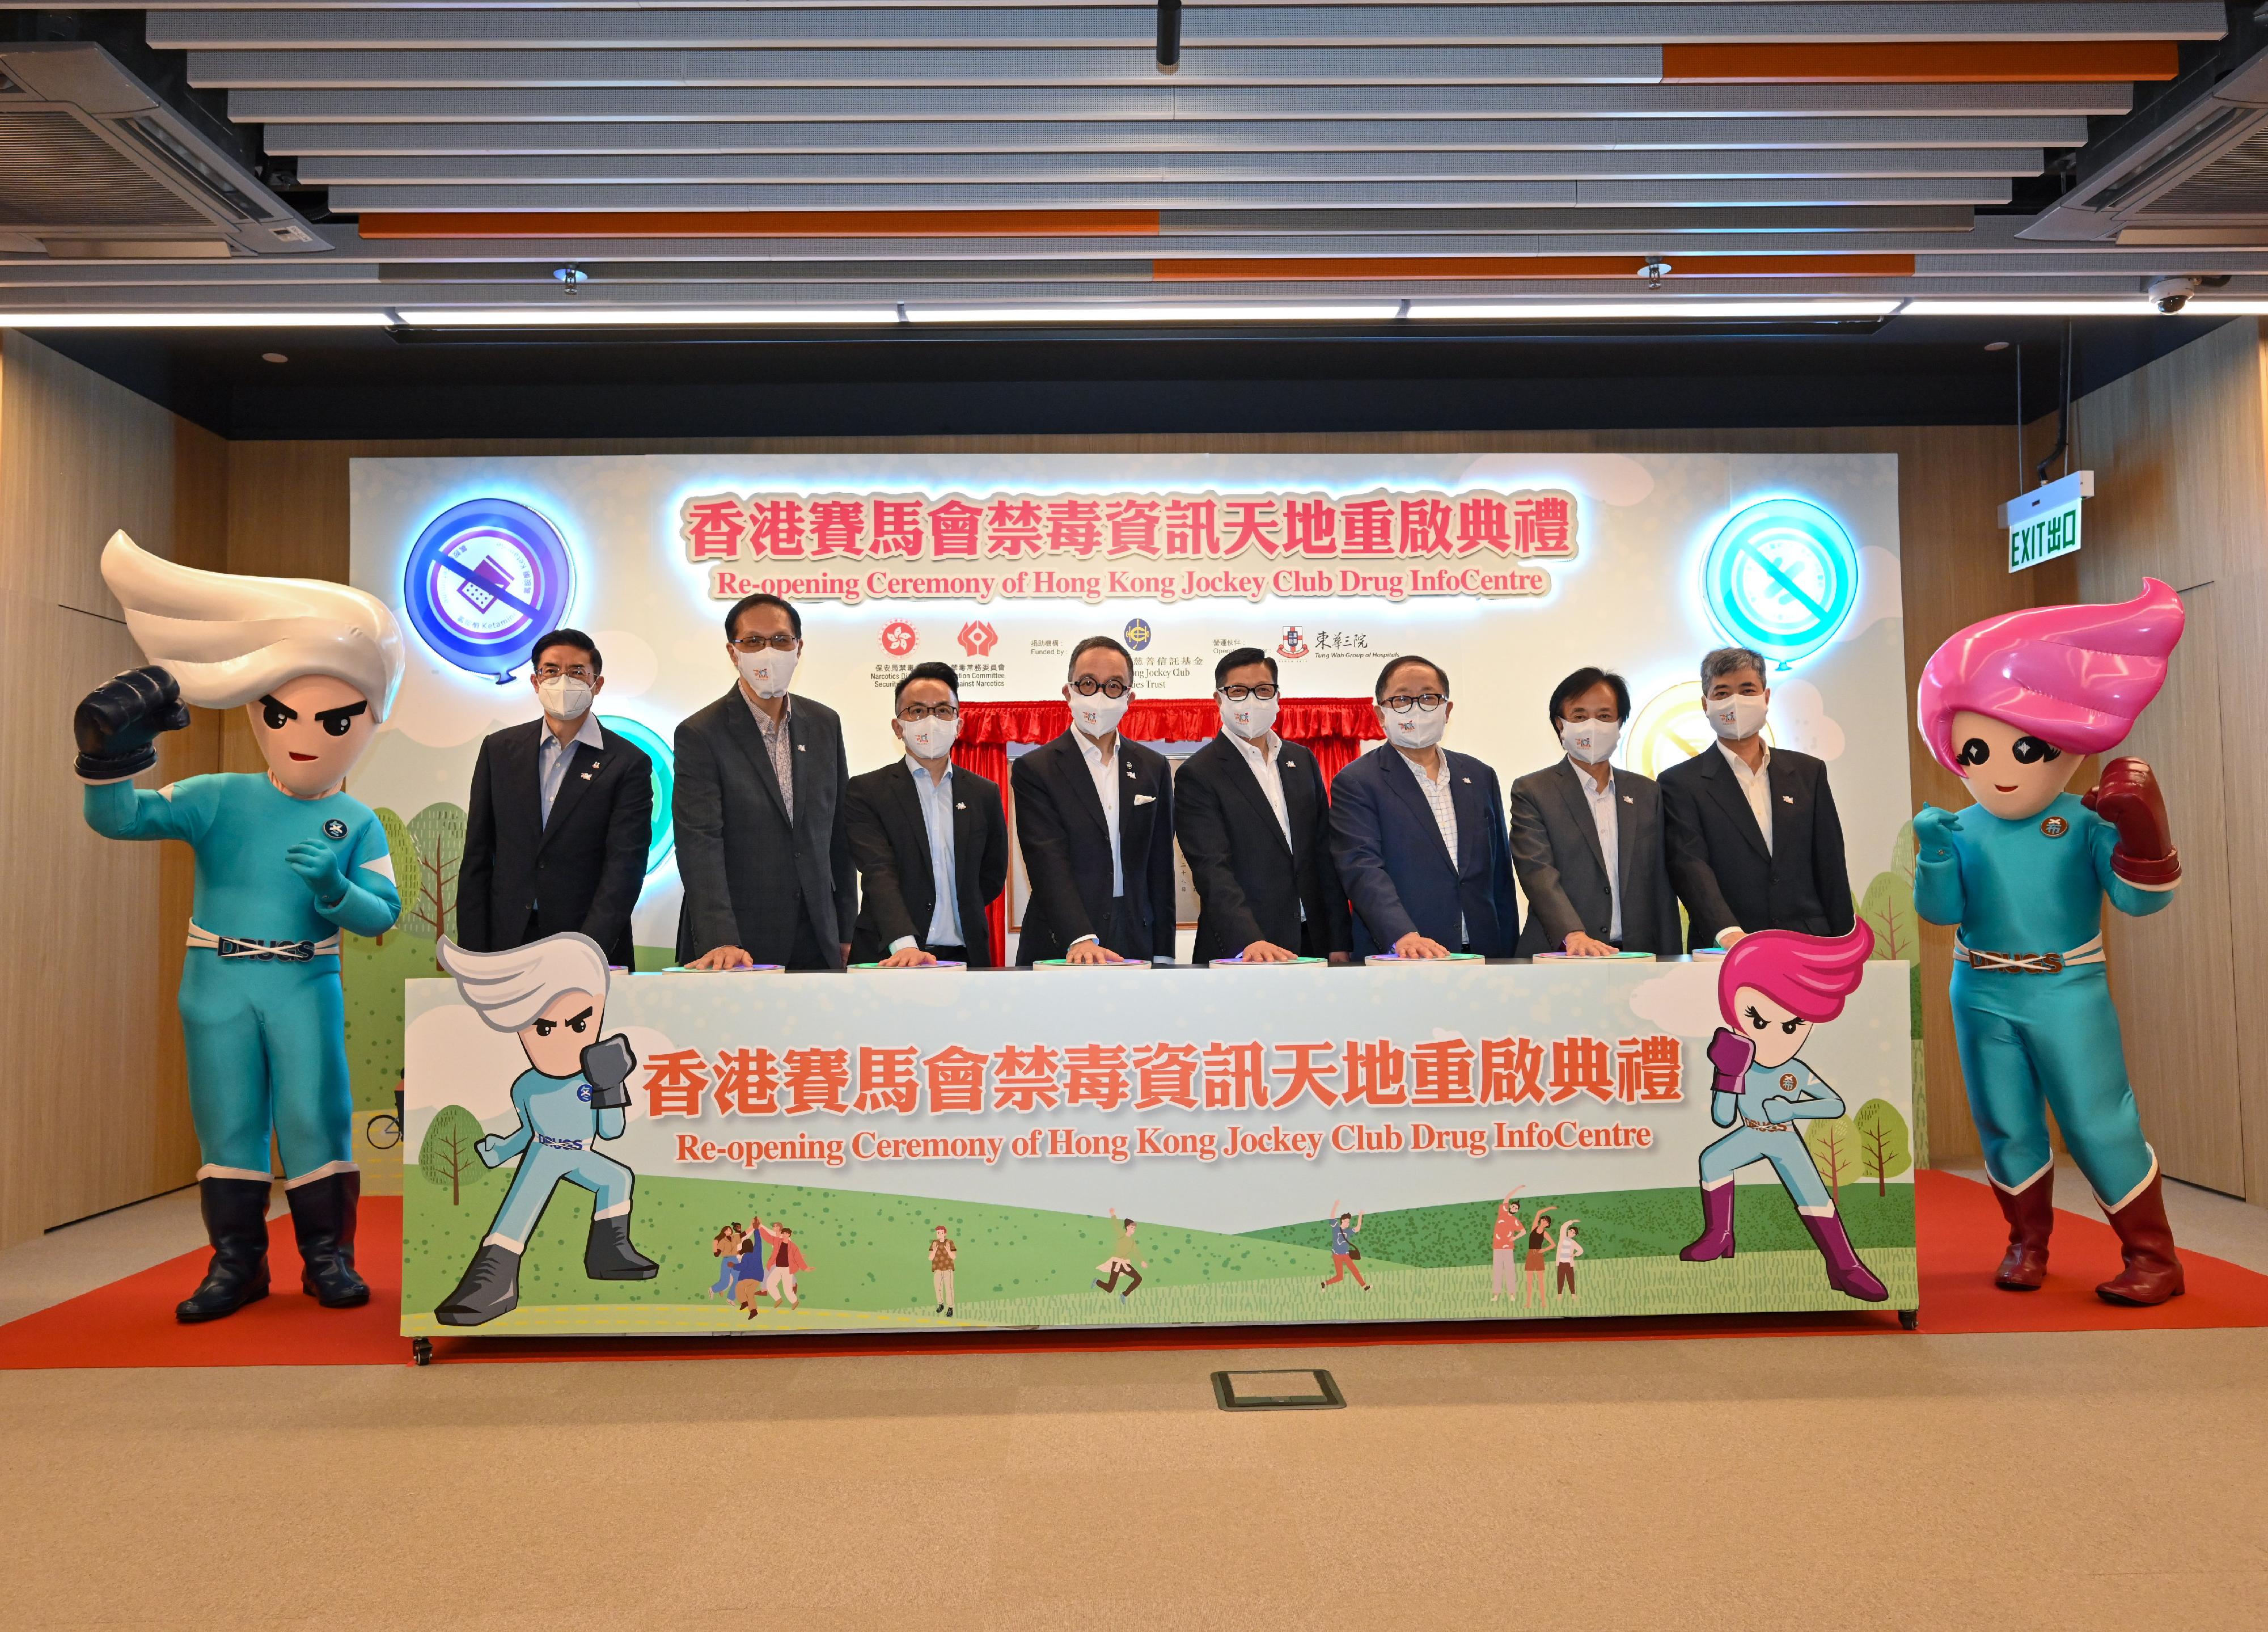 The reopening ceremony of the Hong Kong Jockey Club Drug InfoCentre was held today (November 28). Officiating guests included the Secretary for Security, Mr Tang Ping-keung (fourth right); the Chairman of the Action Committee Against Narcotics (ACAN), Dr Donald Li (third right); the Executive Director (Charities and Community) of the Hong Kong Jockey Club, Dr Gabriel Leung (fourth left); the Permanent Secretary for Security, Mr Patrick Li (third left); the Chairman of the ACAN Sub-committee on Treatment and Rehabilitation, Professor Cheung Yuet-wah (second right); the Chairman of the ACAN Sub-committee on Preventive Education and Publicity, Mr Chan Wing-kin (first right); the Director of Architectural Services, Mr Edward Tse (second left); and the Chairman of the Tung Wah Group of Hospitals, Mr Philip Ma (first left).